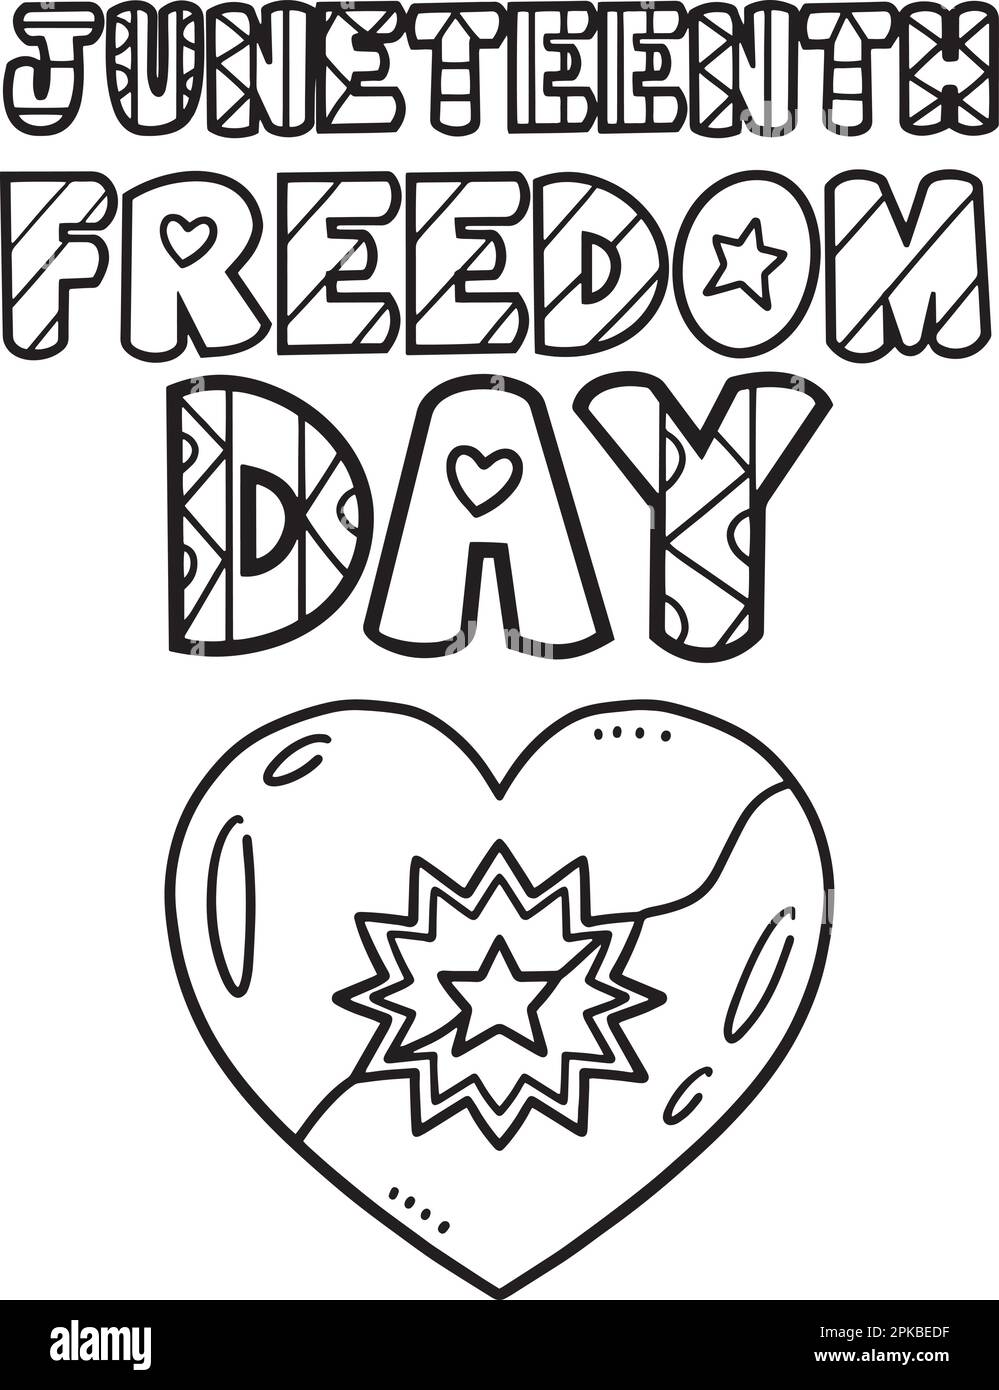 Juneteenth freedom day isolated coloring page stock vector image art